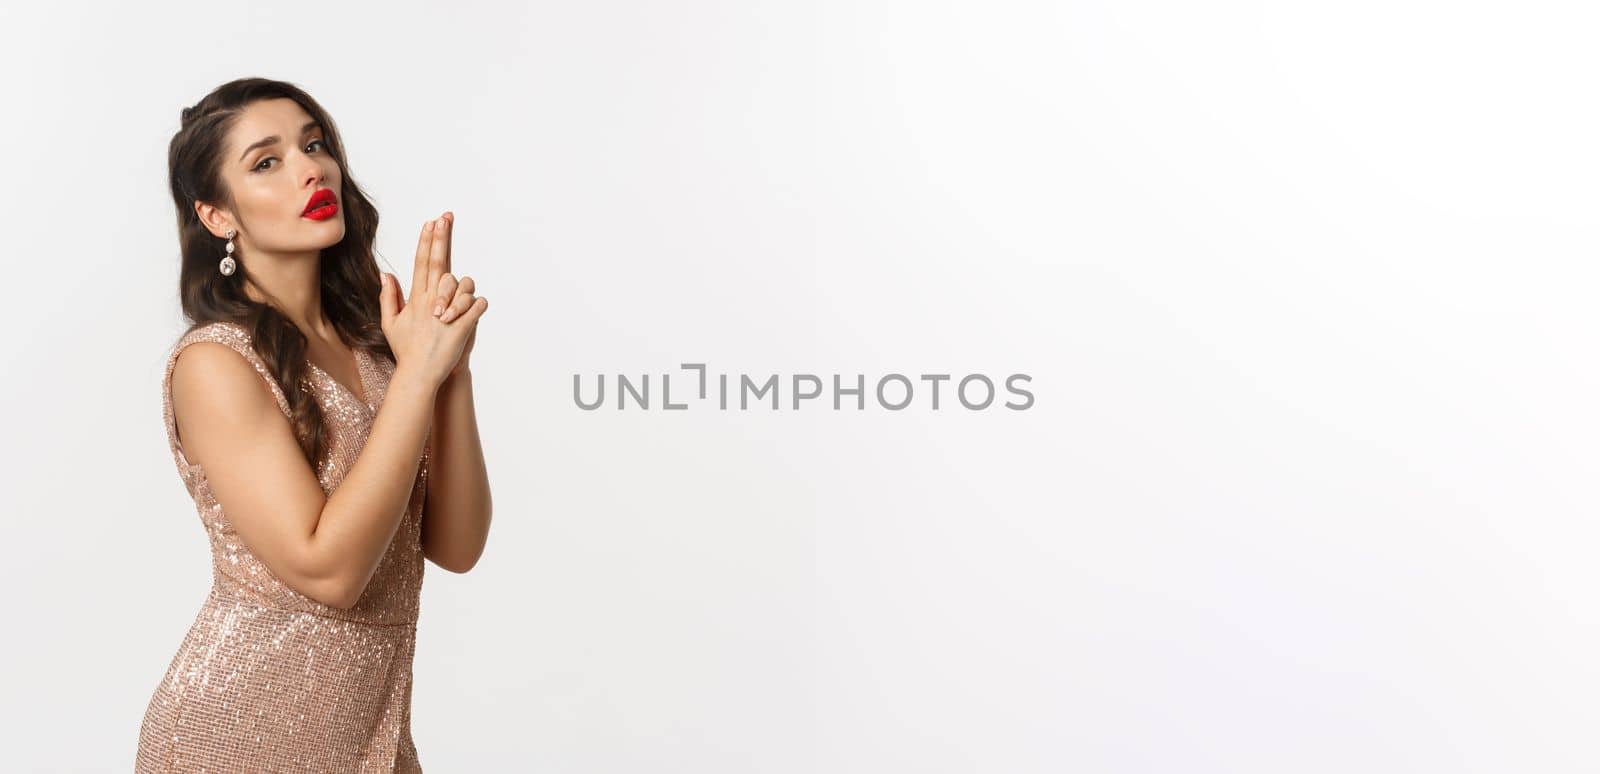 Concept of casino, celebration and party. Sexy woman in glamour dress, red lips, making finger gun pistol gesture and looking at camera, standing over white background.